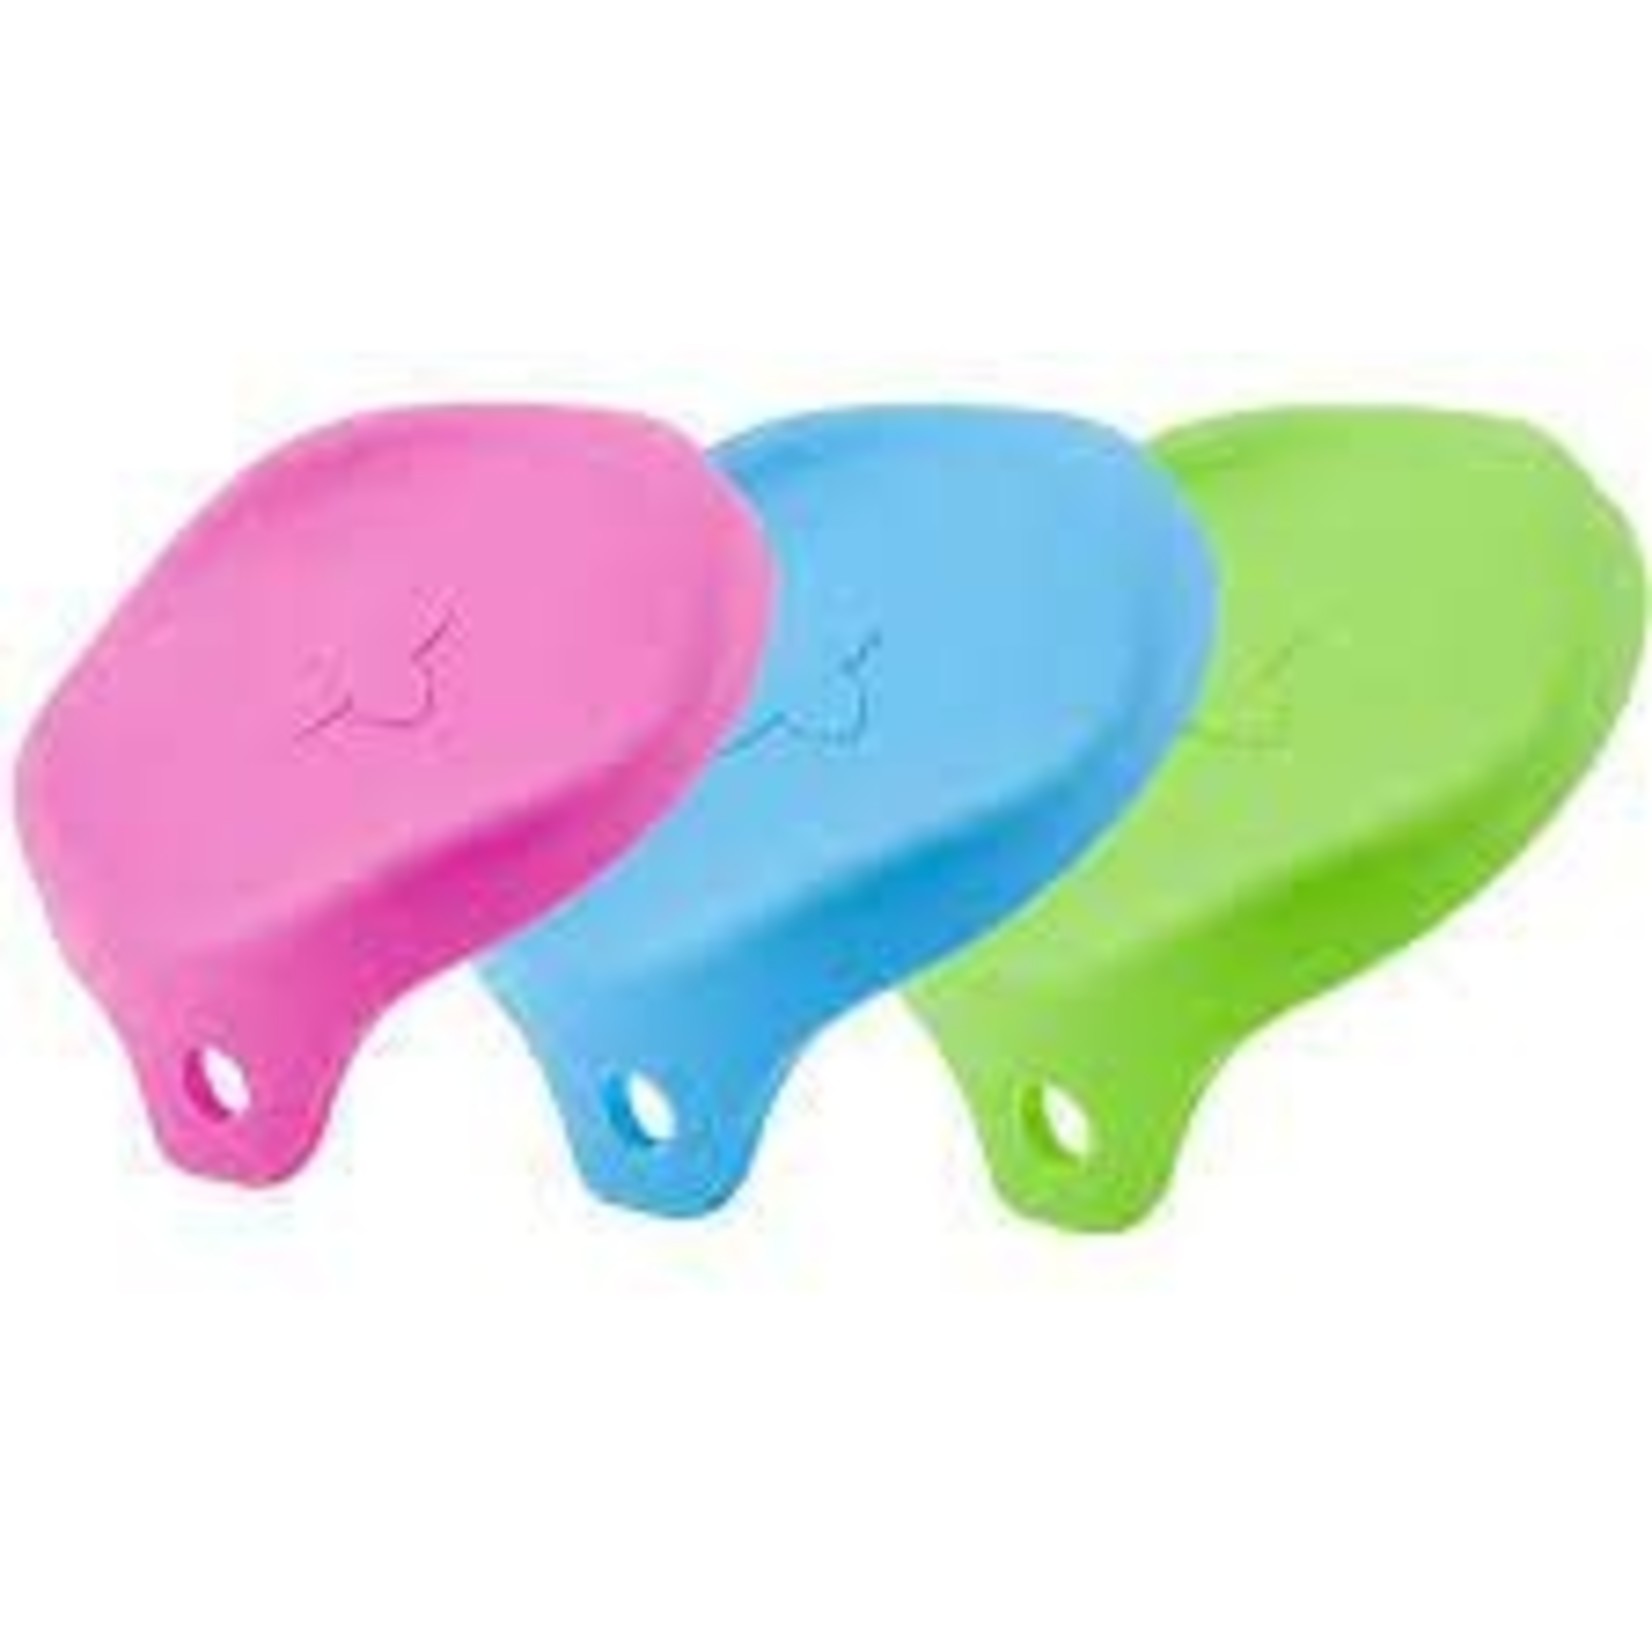 Beco Pets Silicone Can Cover